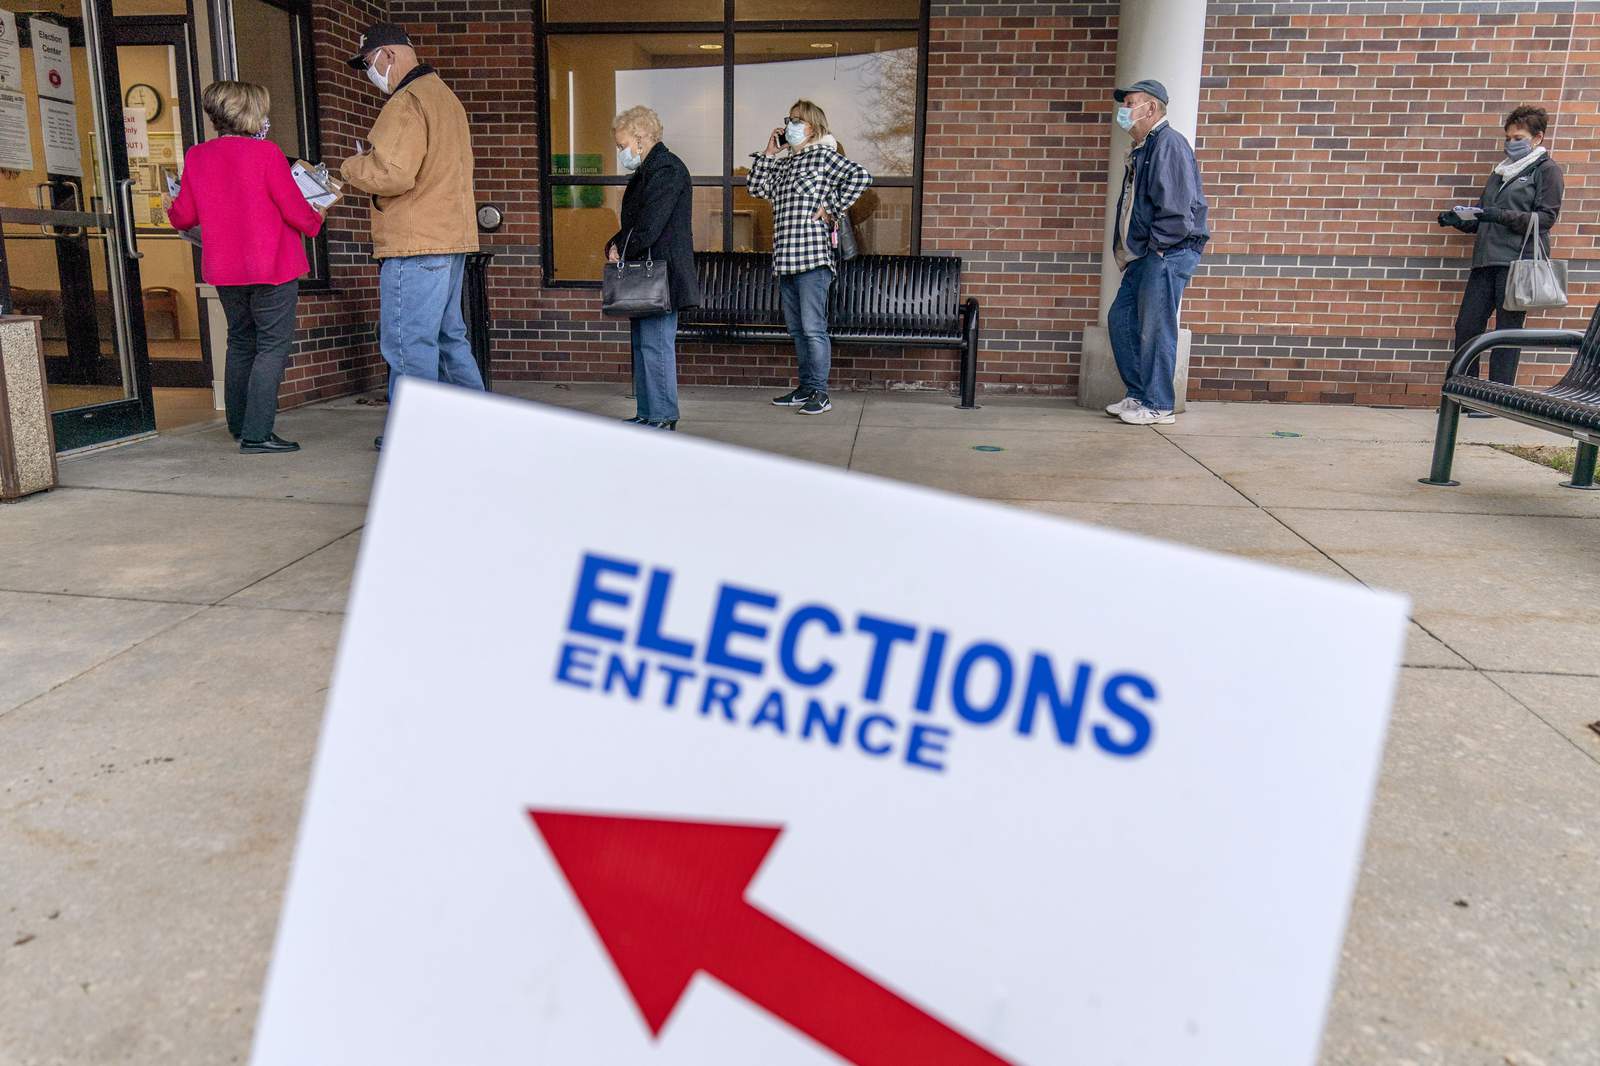 Few Michigan absentee ballots rejected amid record voter turnout in 2020 election